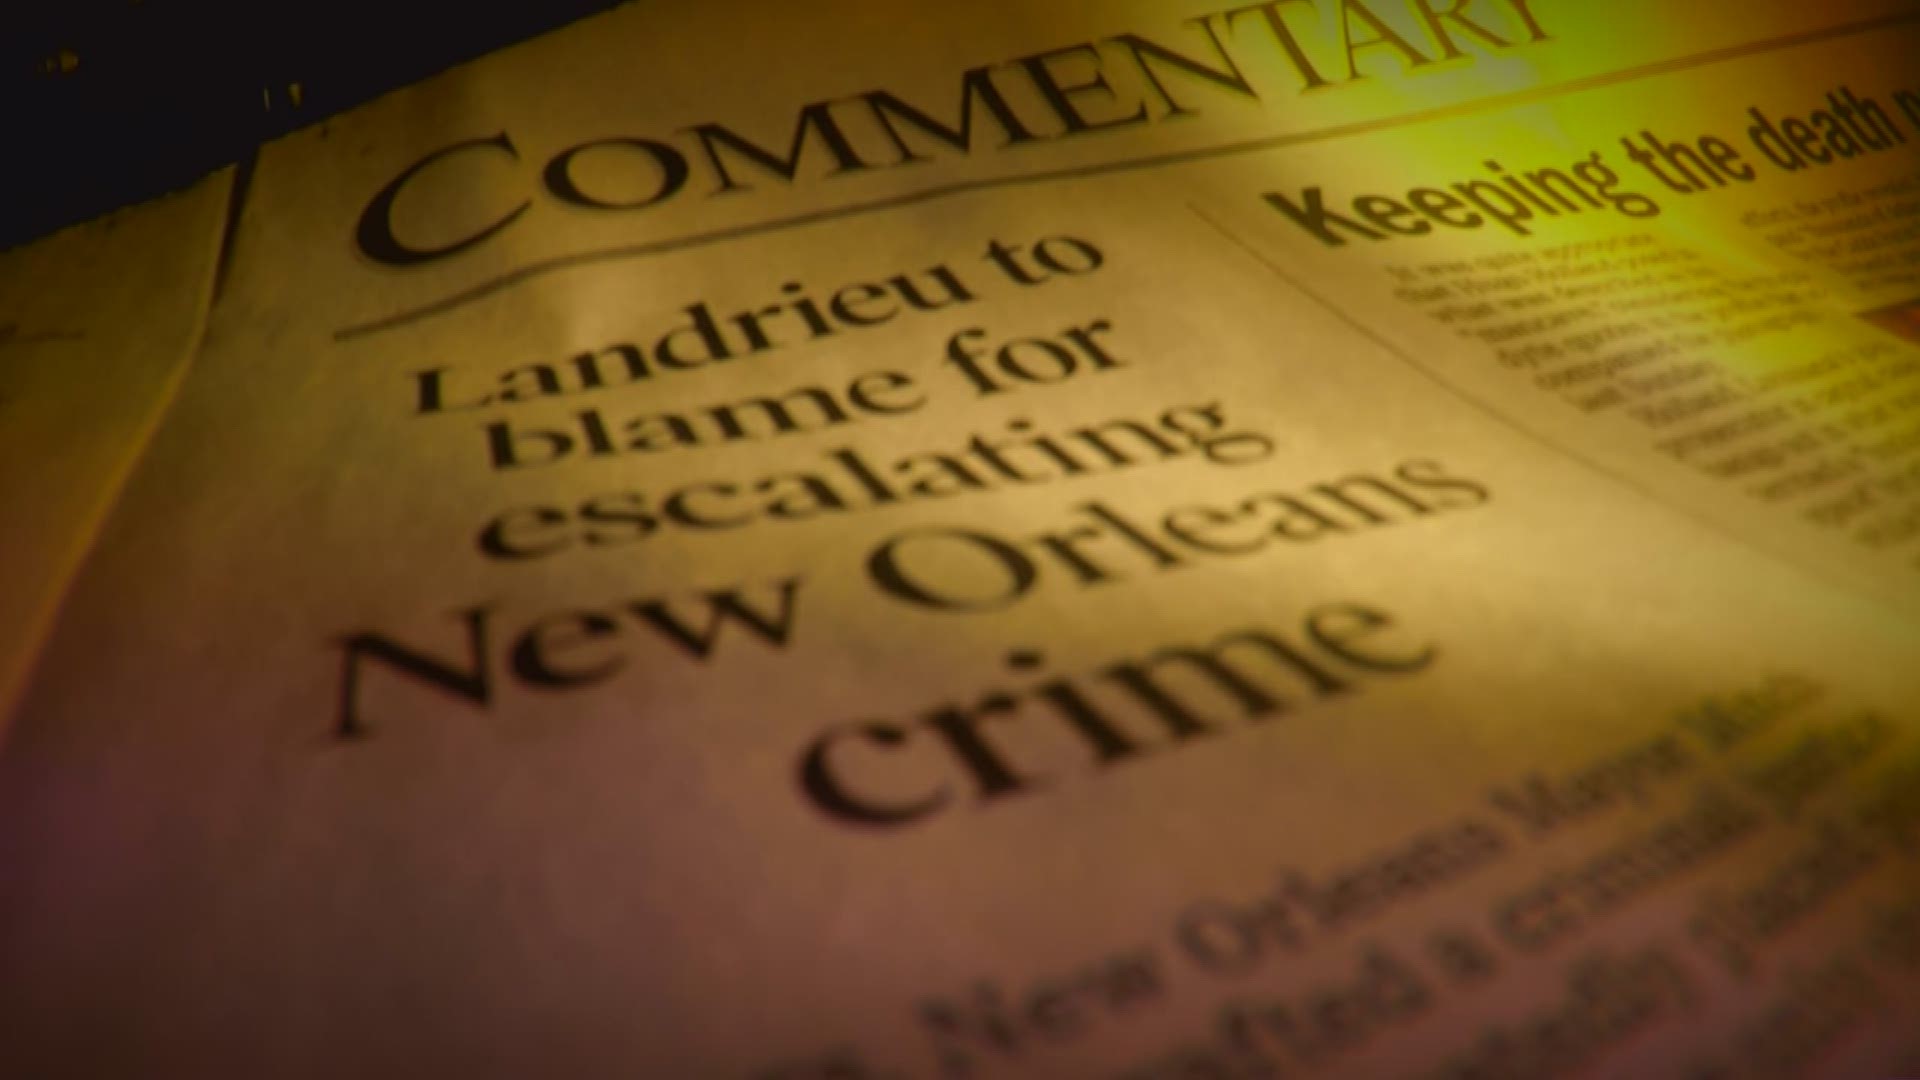 New Orleans District Attorney Leon Cannizzaro wrote a column in The New Orleans Advocate criticizing Mayor Mitch Landrieu for a public safety strategy the DA believes has ultimately endangered people in the city.